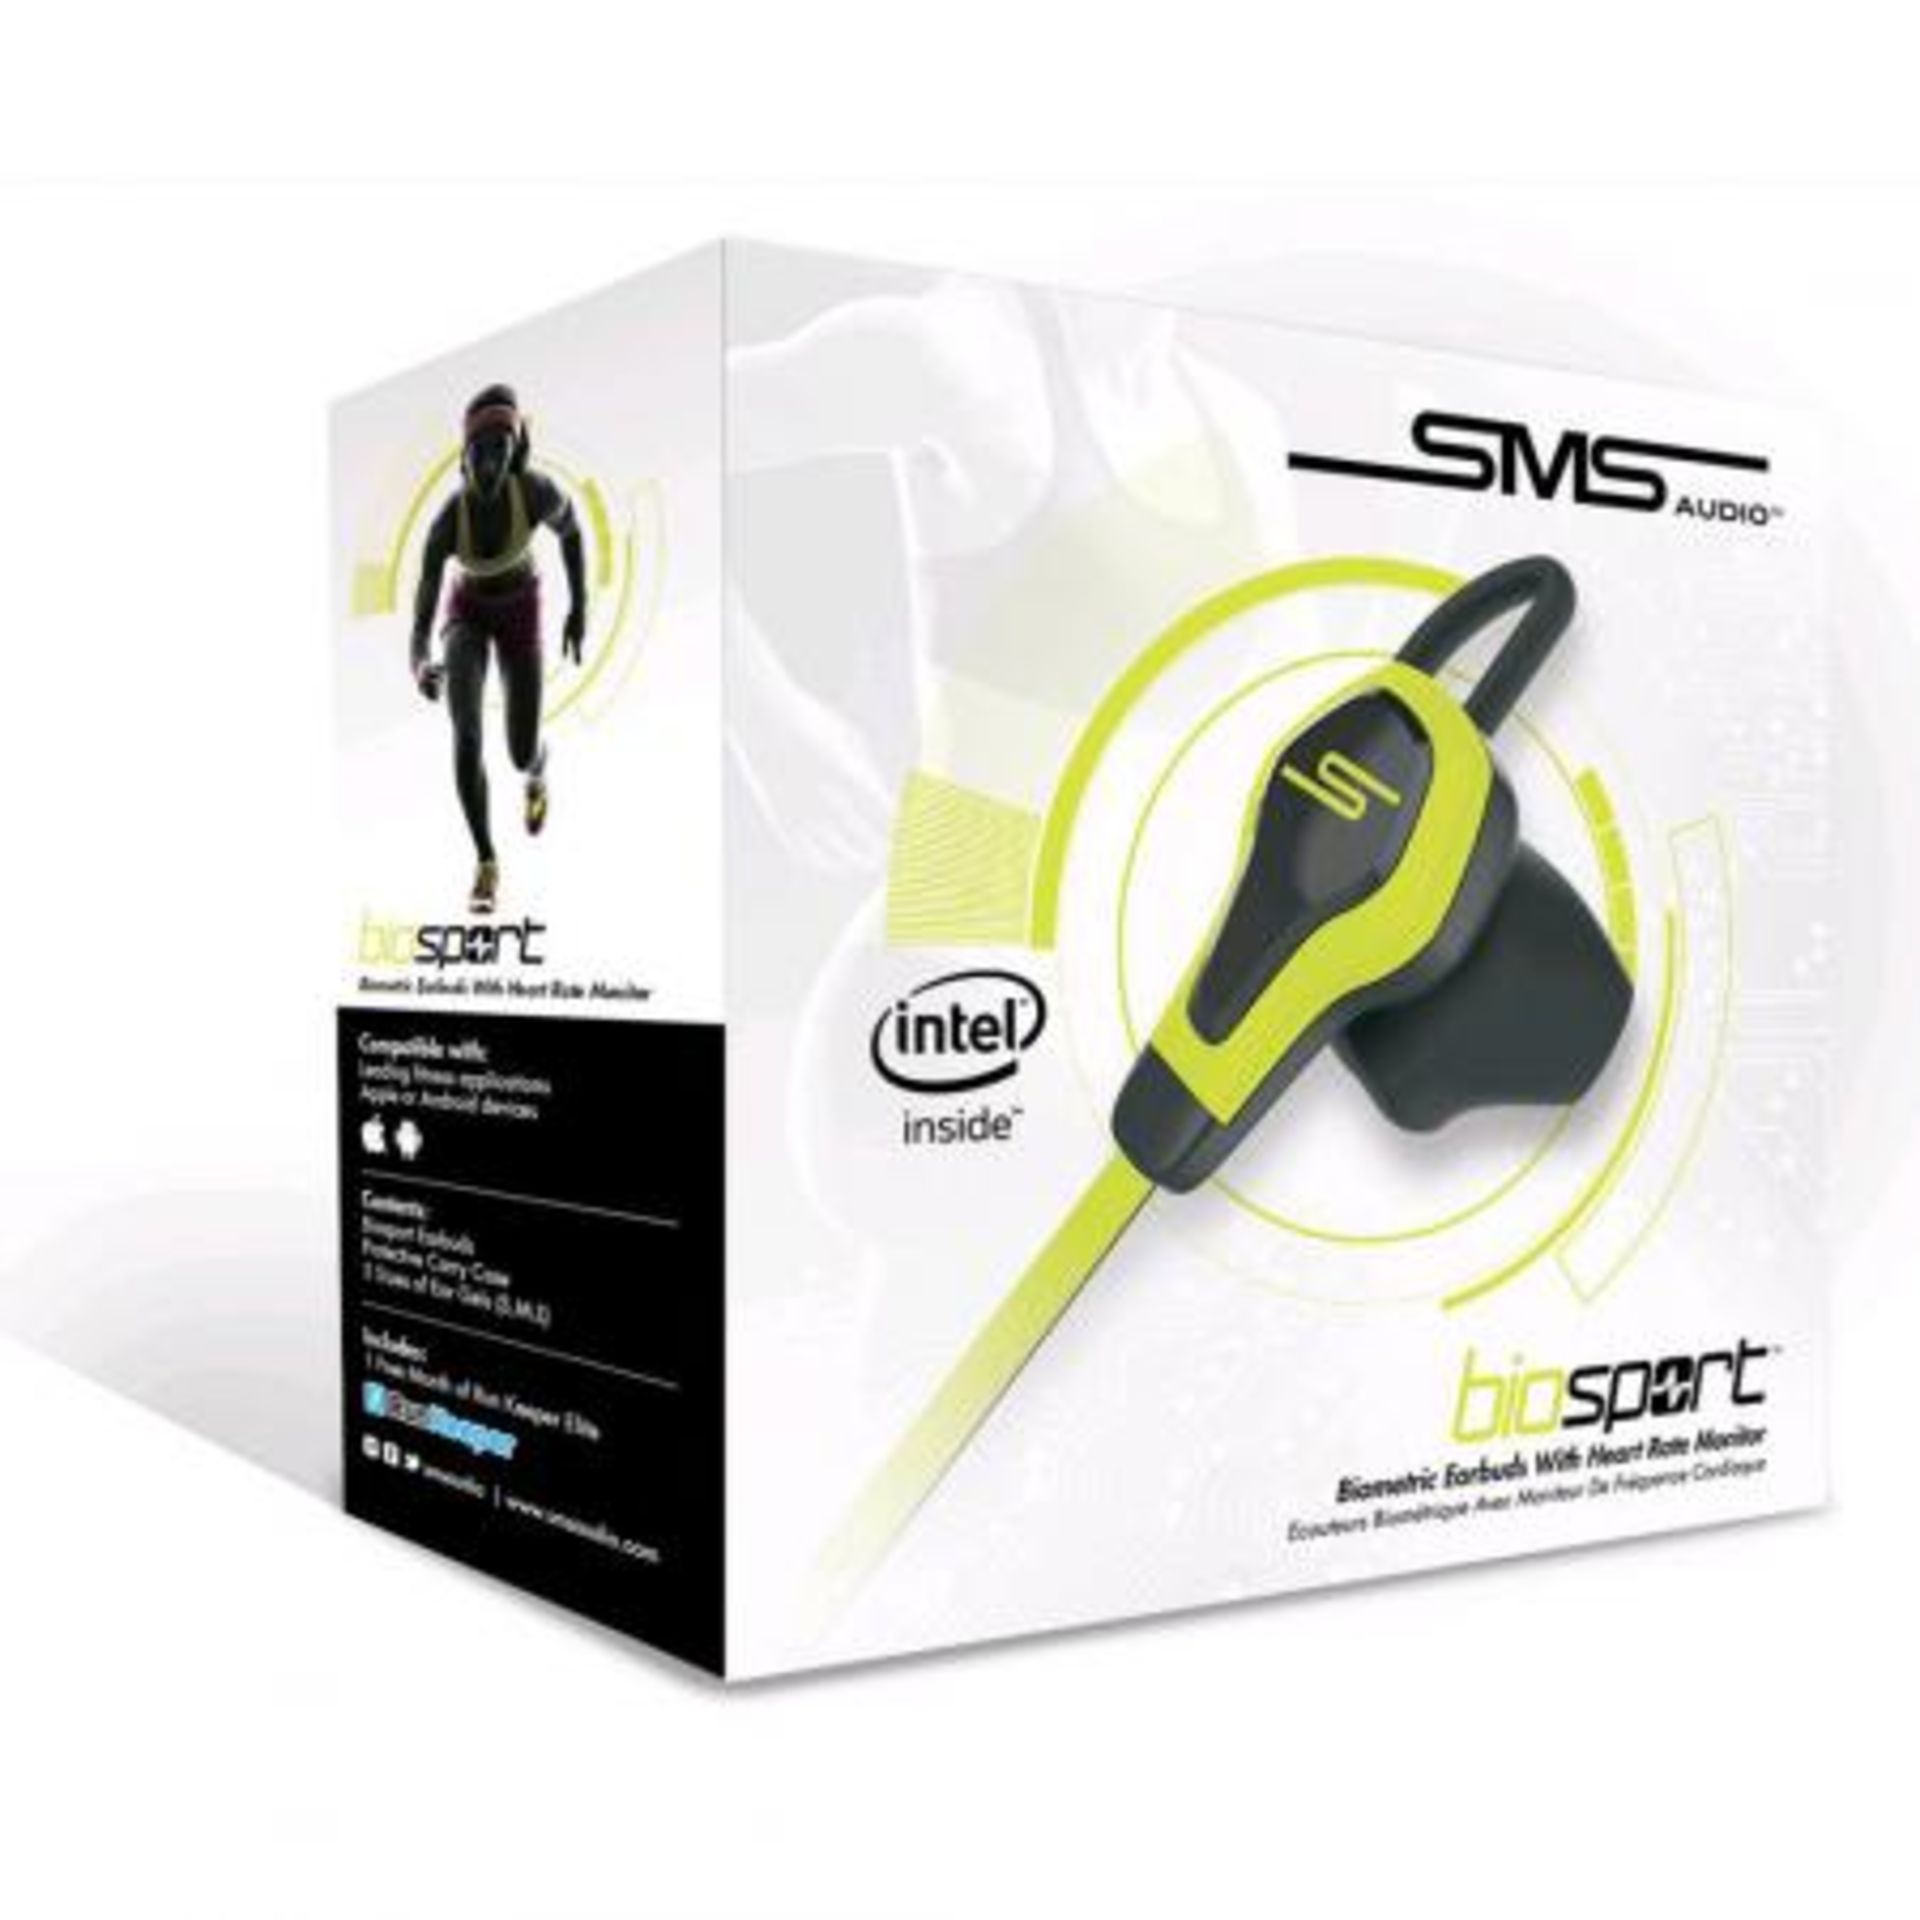 V *TRADE QTY* Brand New SMS Audio BioSport Earphones - Heart Rate Monitor Measures Changes In